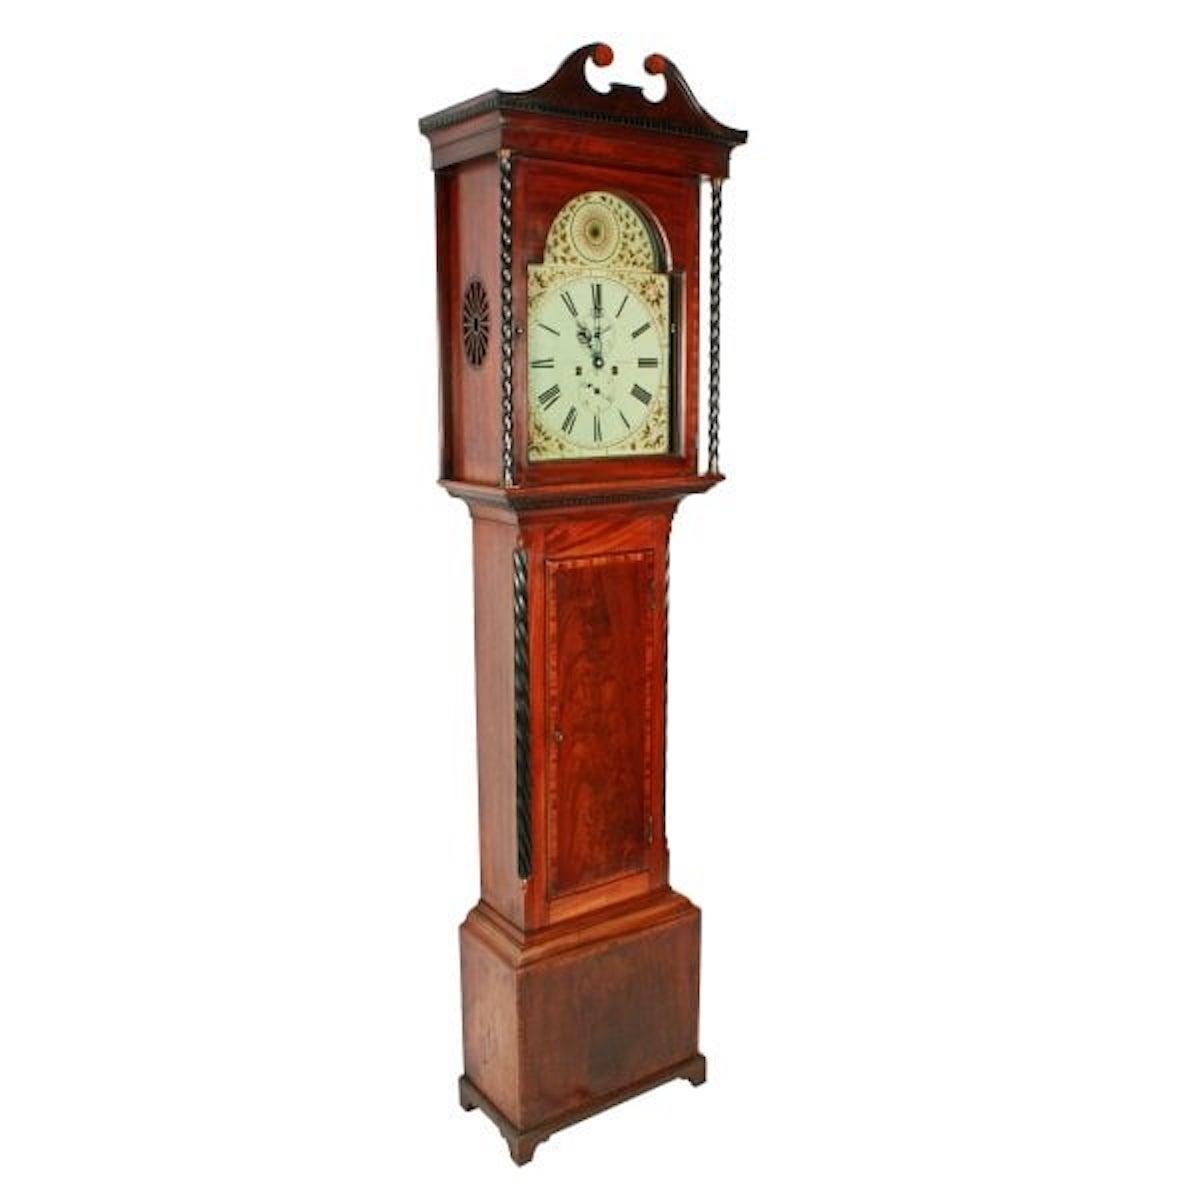 Georgian Mahogany Grandfather clock

An early 19th century Scottish Georgian mahogany Grandfather clock.

The clock has an eight day double weighted works that strike the hour on a bell.

The white painted dial is decorated with flowers and